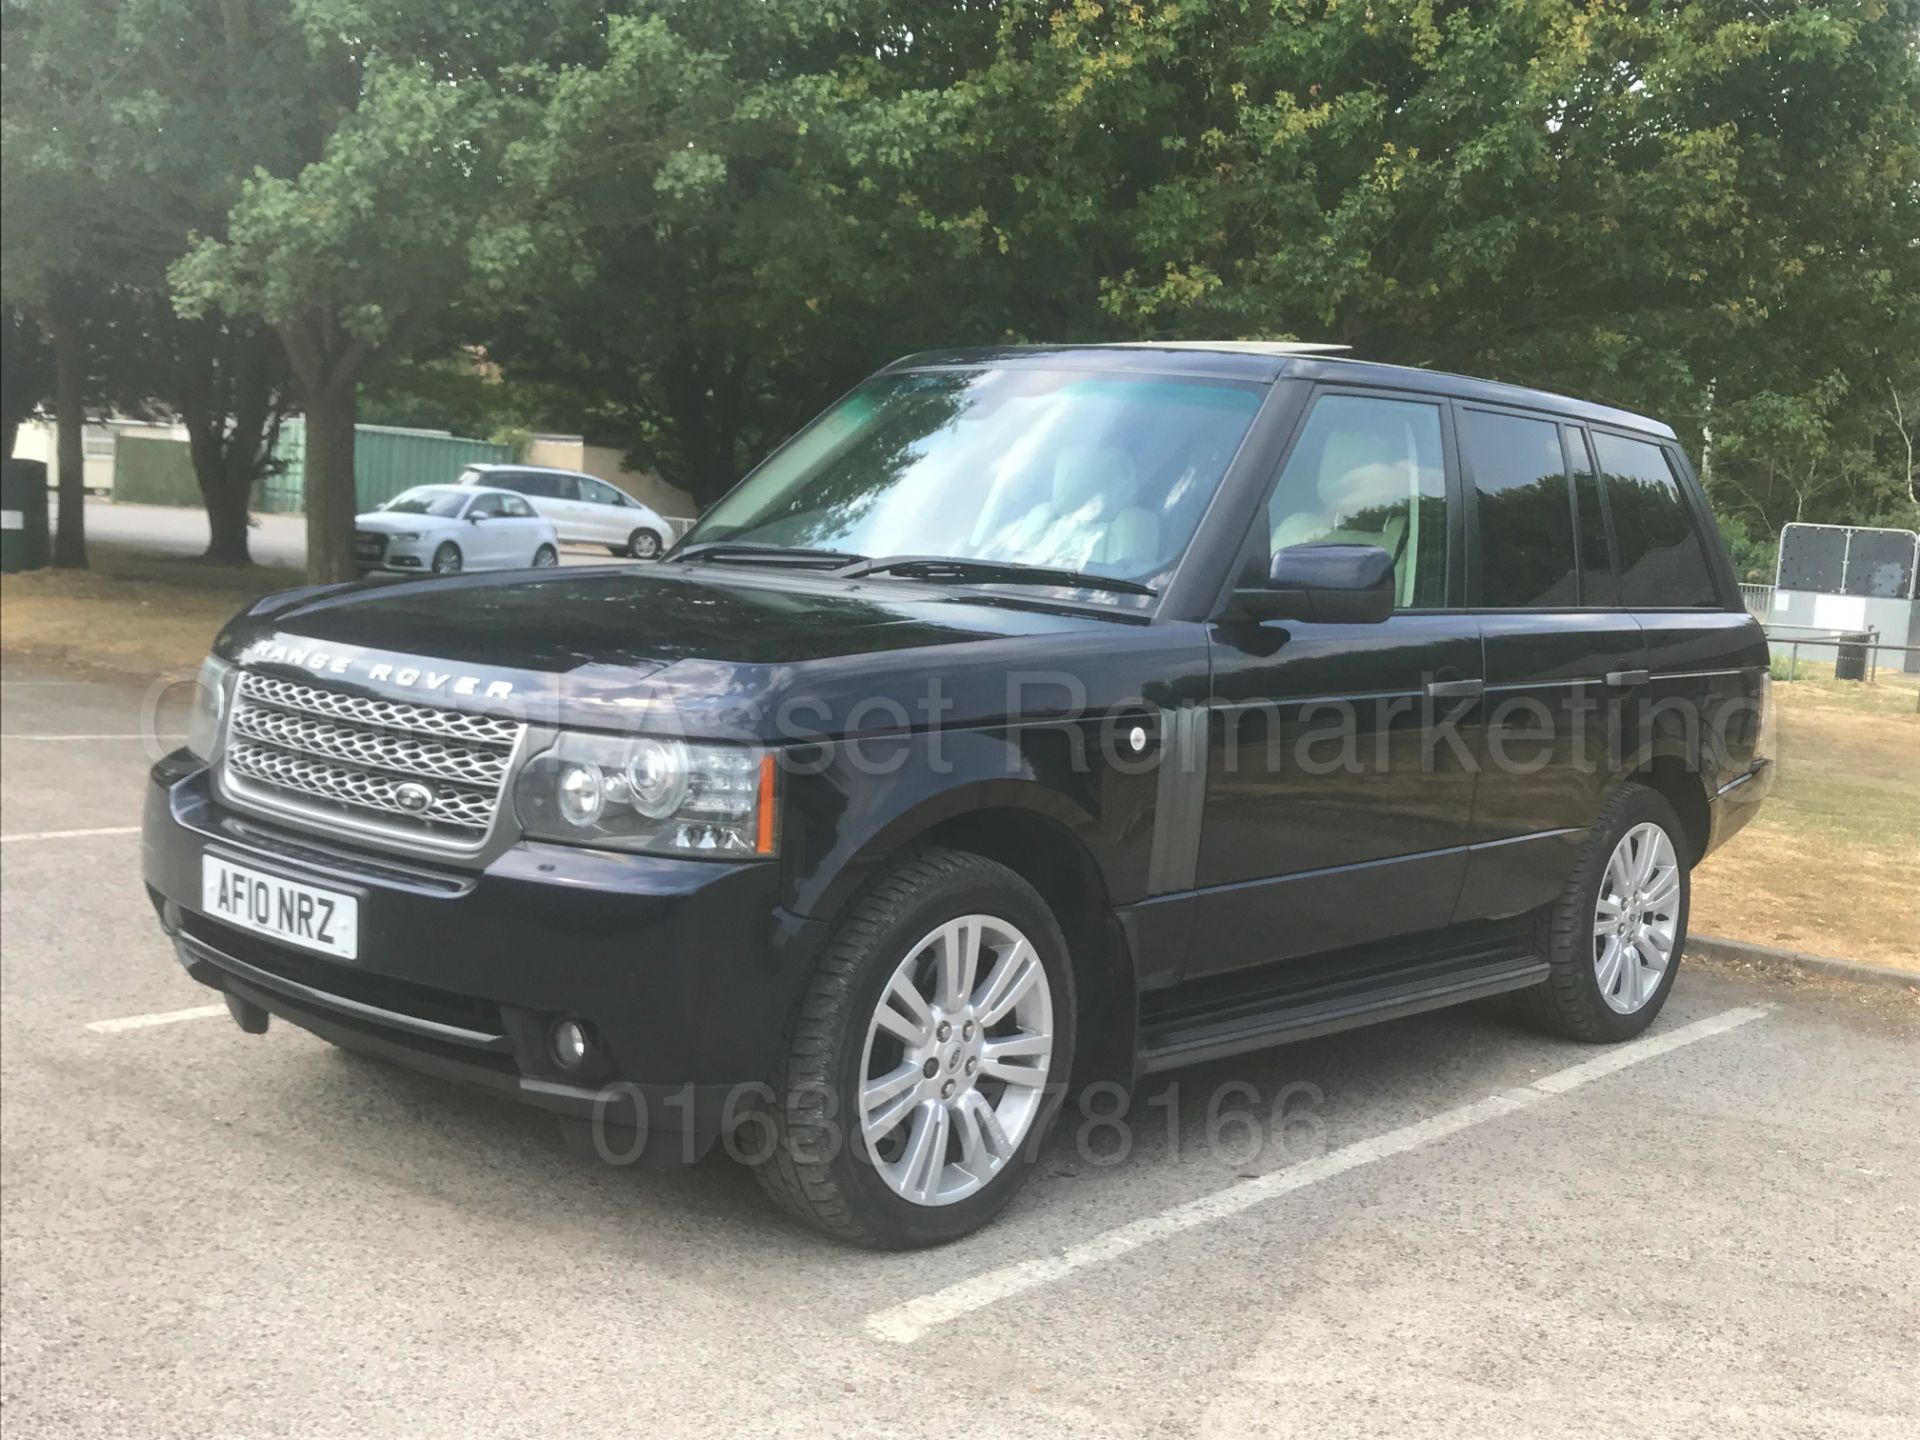 RANGE ROVER VOGUE **SE EDITION** (2010 - FACELIFT EDITION) 'TDV8 - 268 BHP - AUTO' **FULLY LOADED** - Image 5 of 62